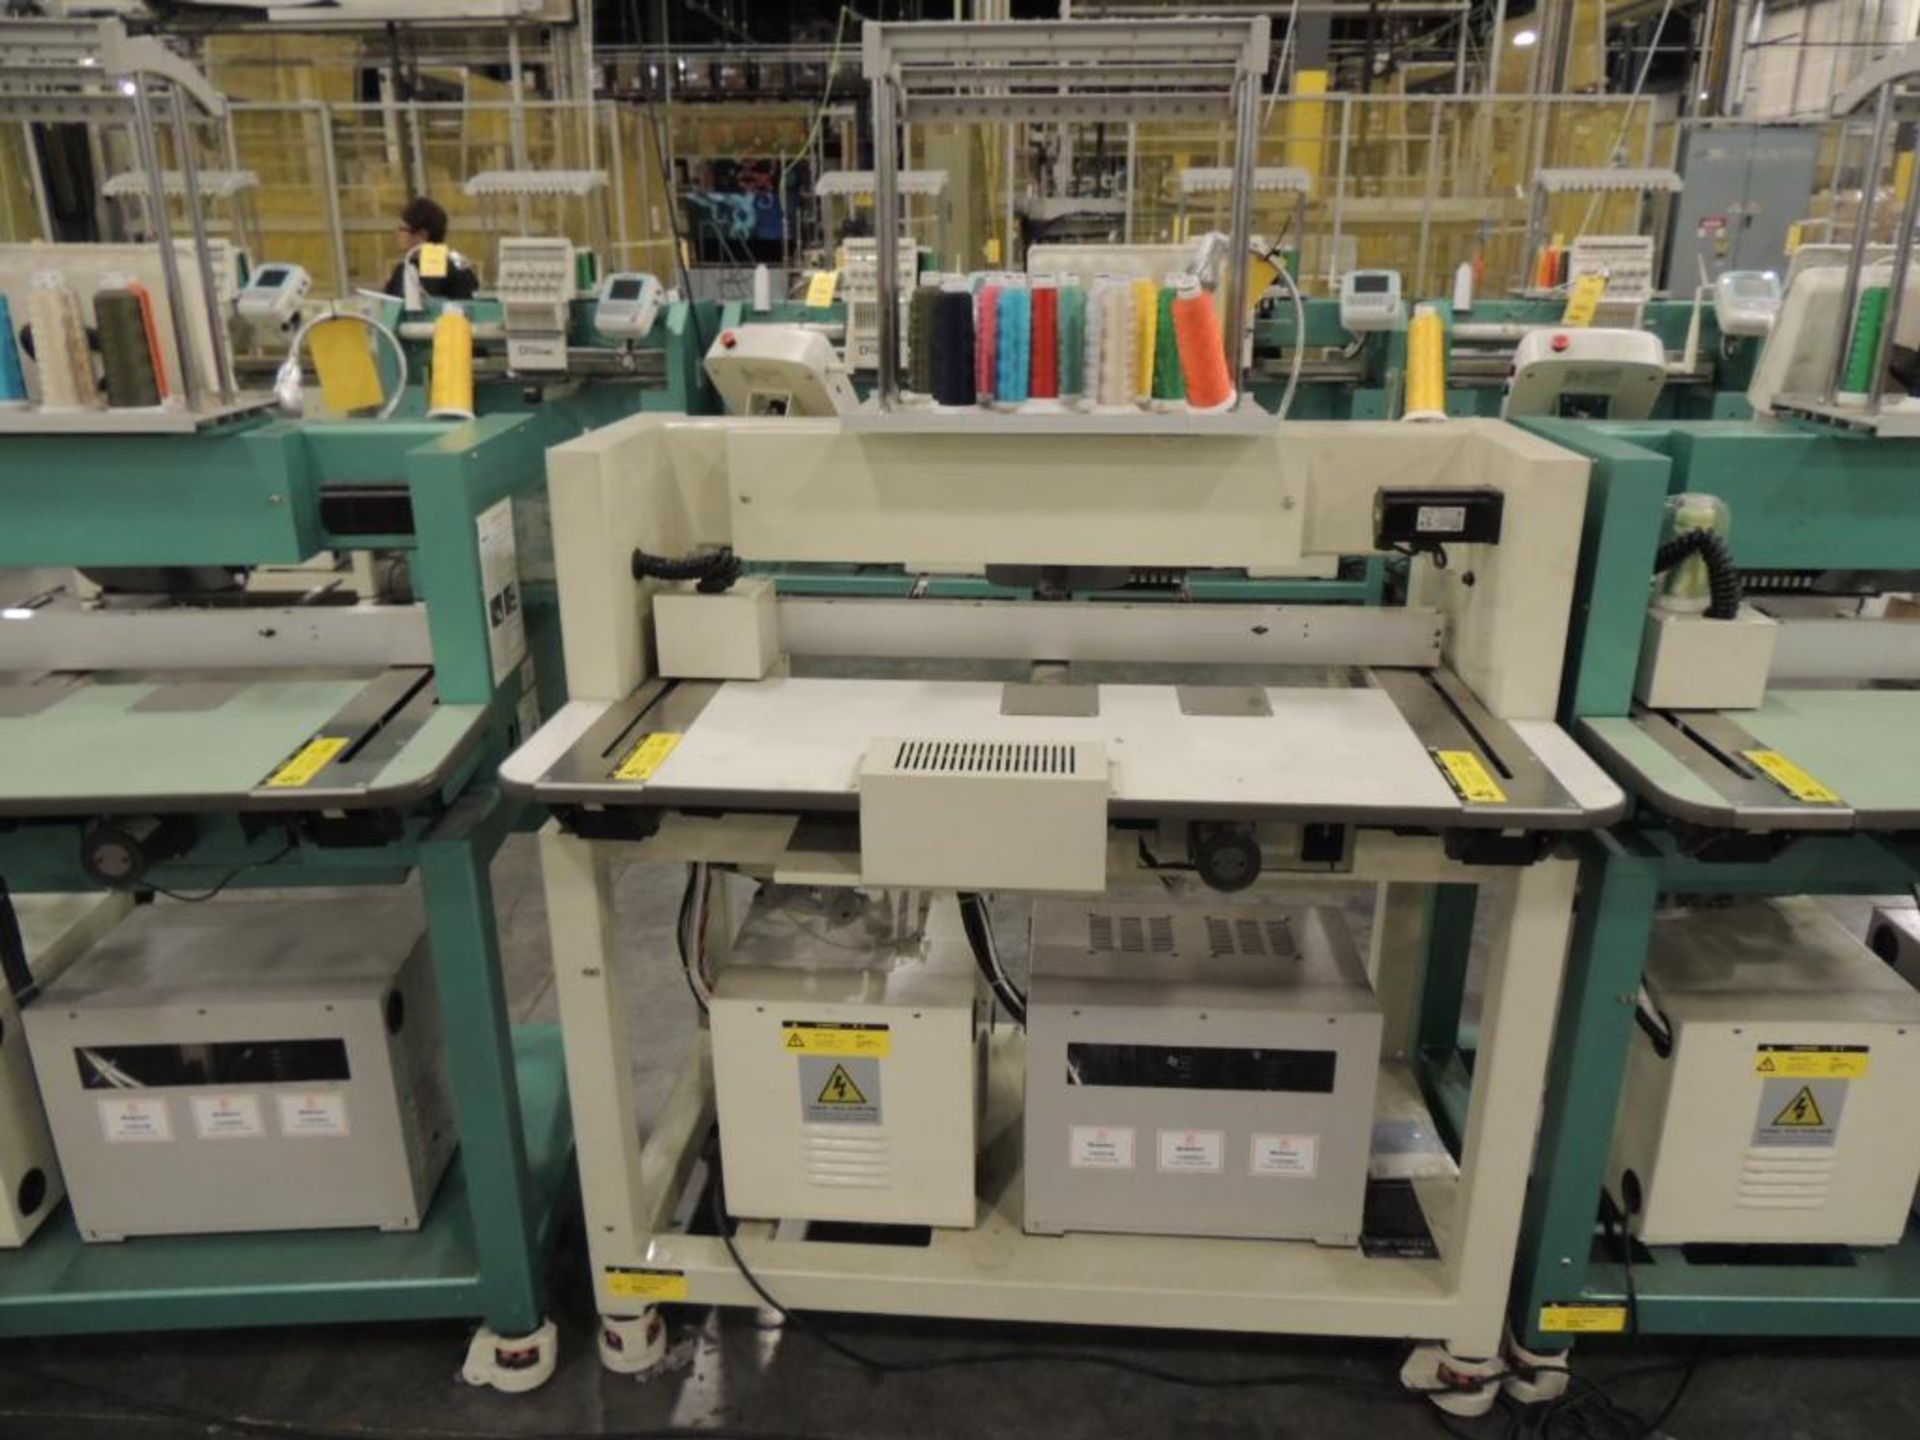 2016 Richpease Model RPED-TC-1201-400X45L Computerized Cap Tubular Embroidery Machine, S/N 160829298 - Image 2 of 2